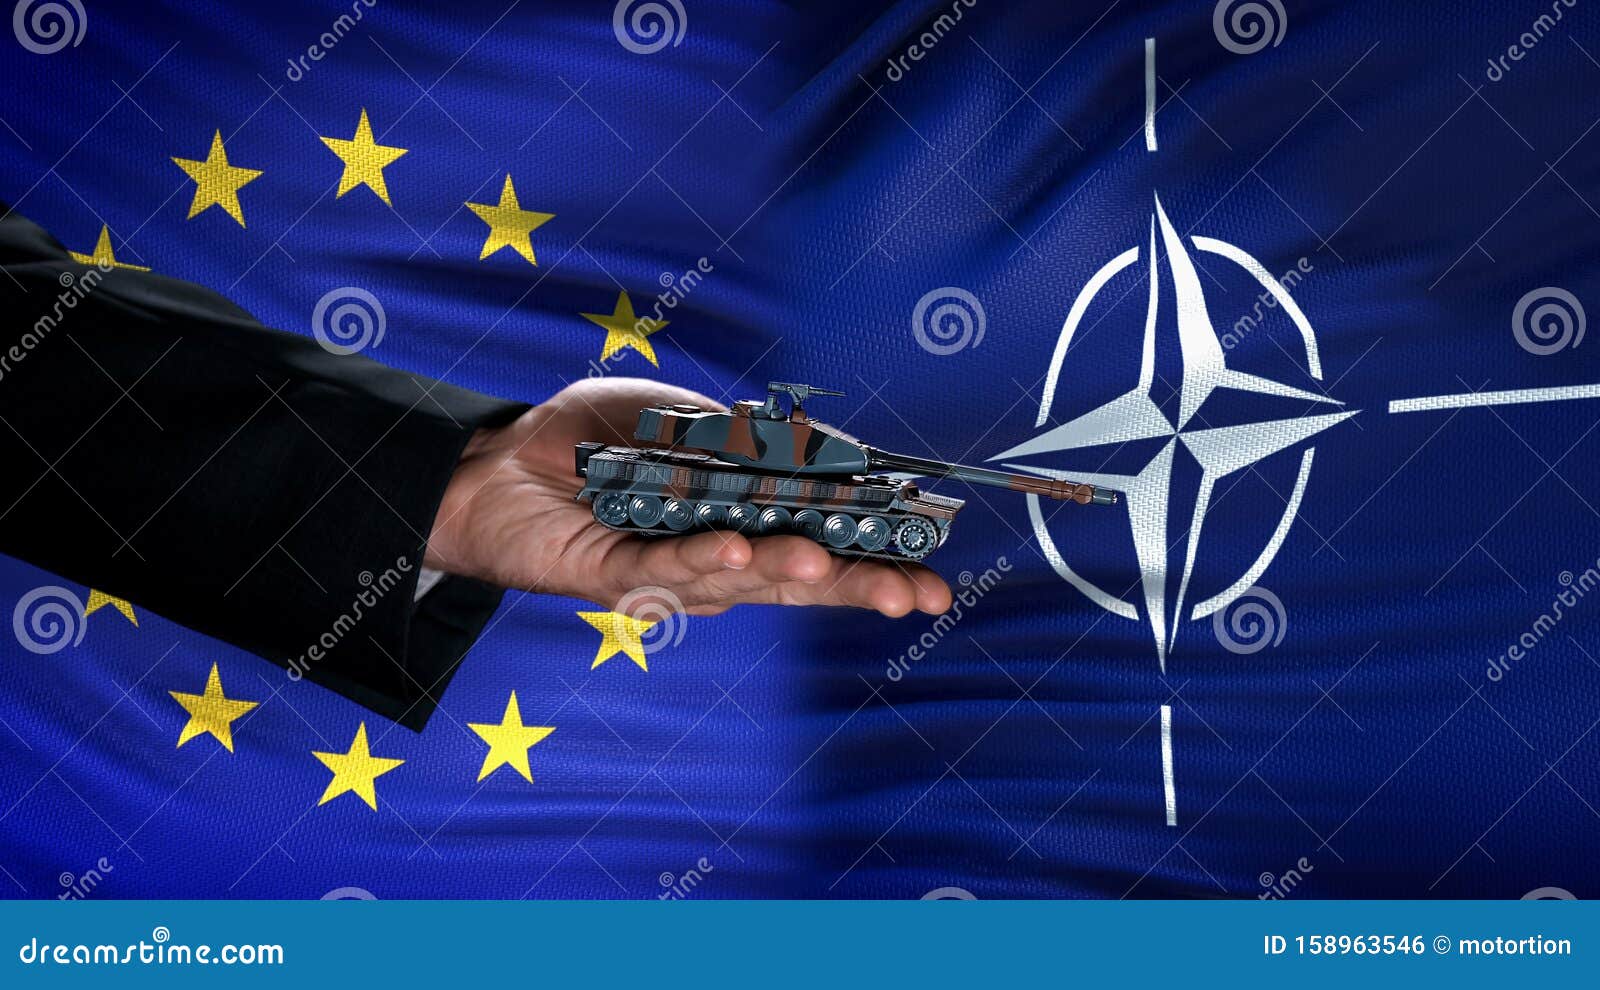 official hand holding toy tank against eu and nato flags, military agreement